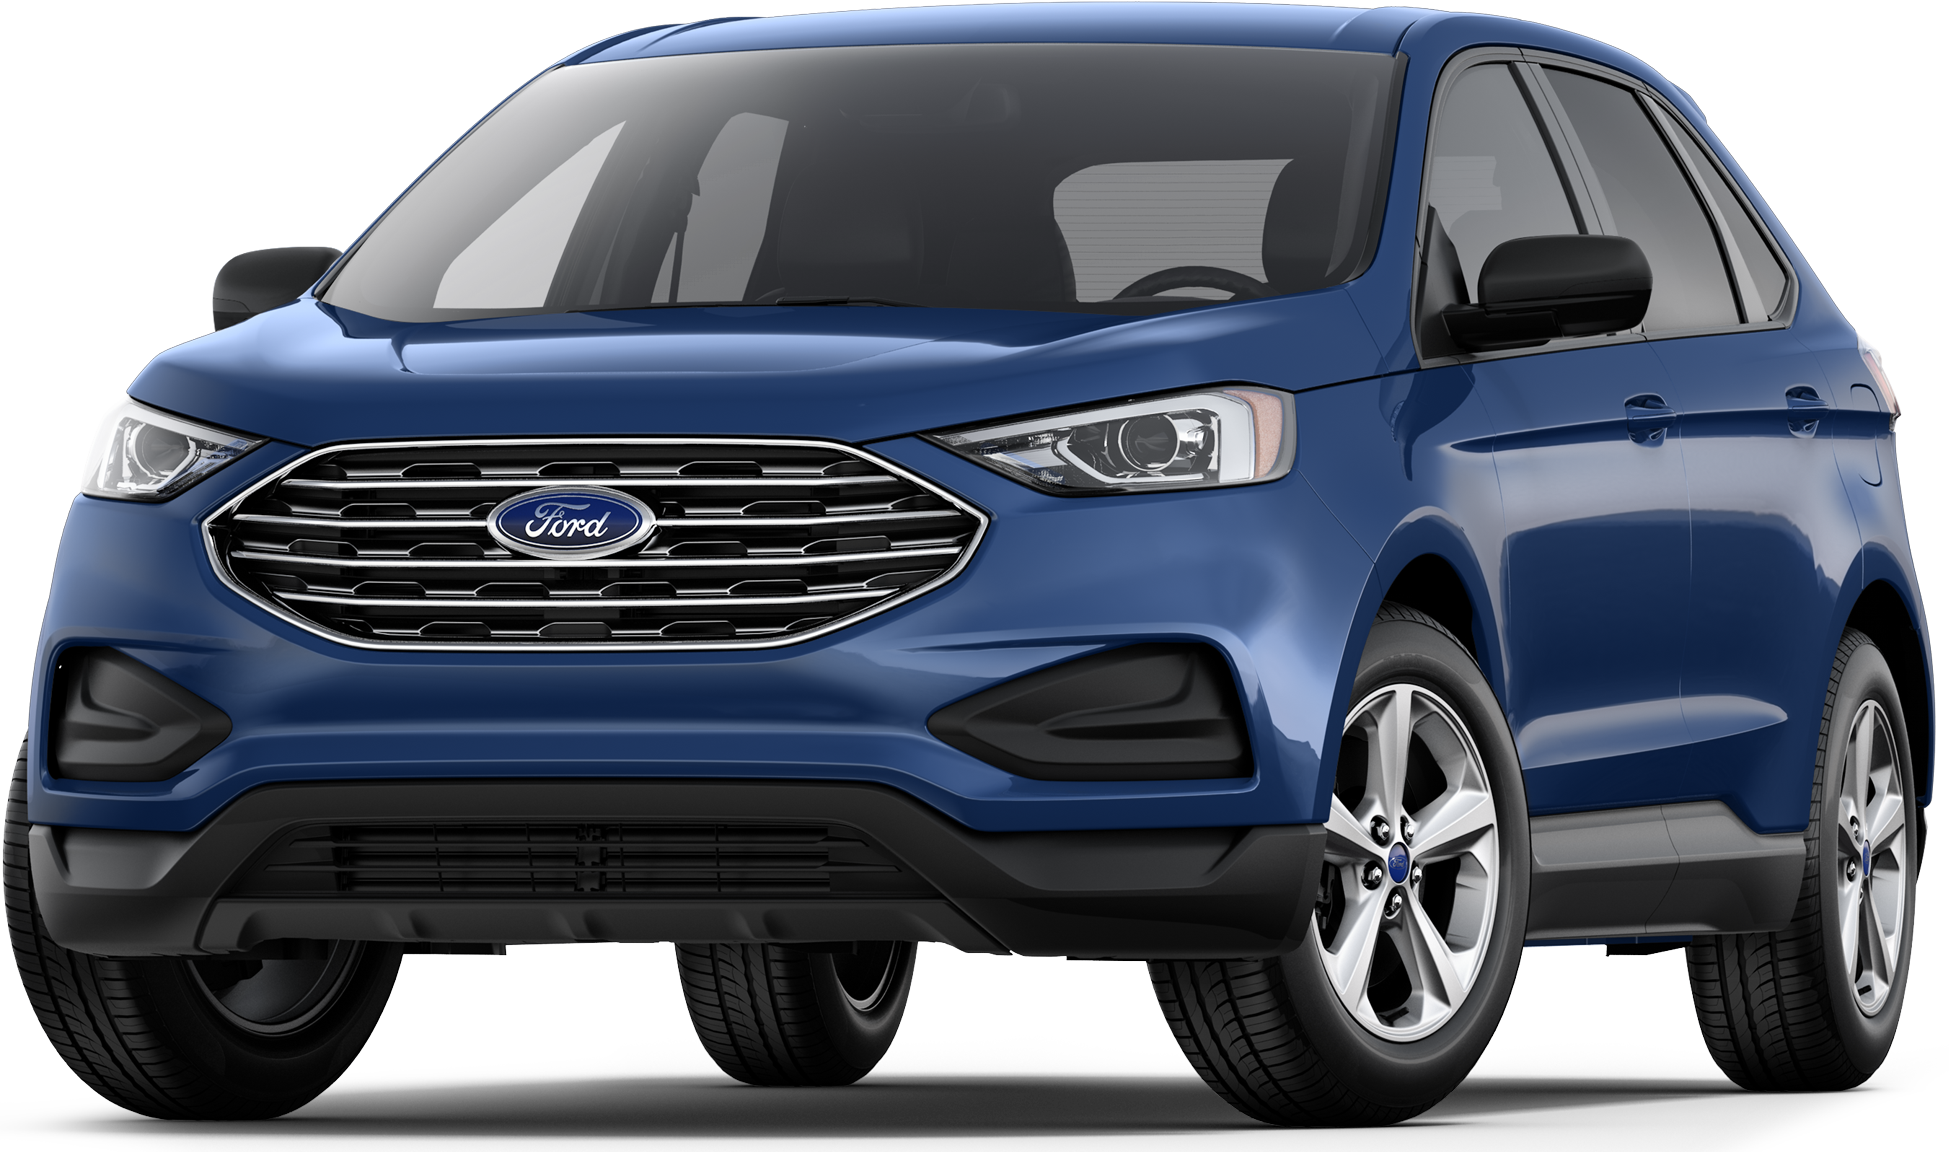 2022 Ford Edge Incentives, Specials & Offers in Quitman TX